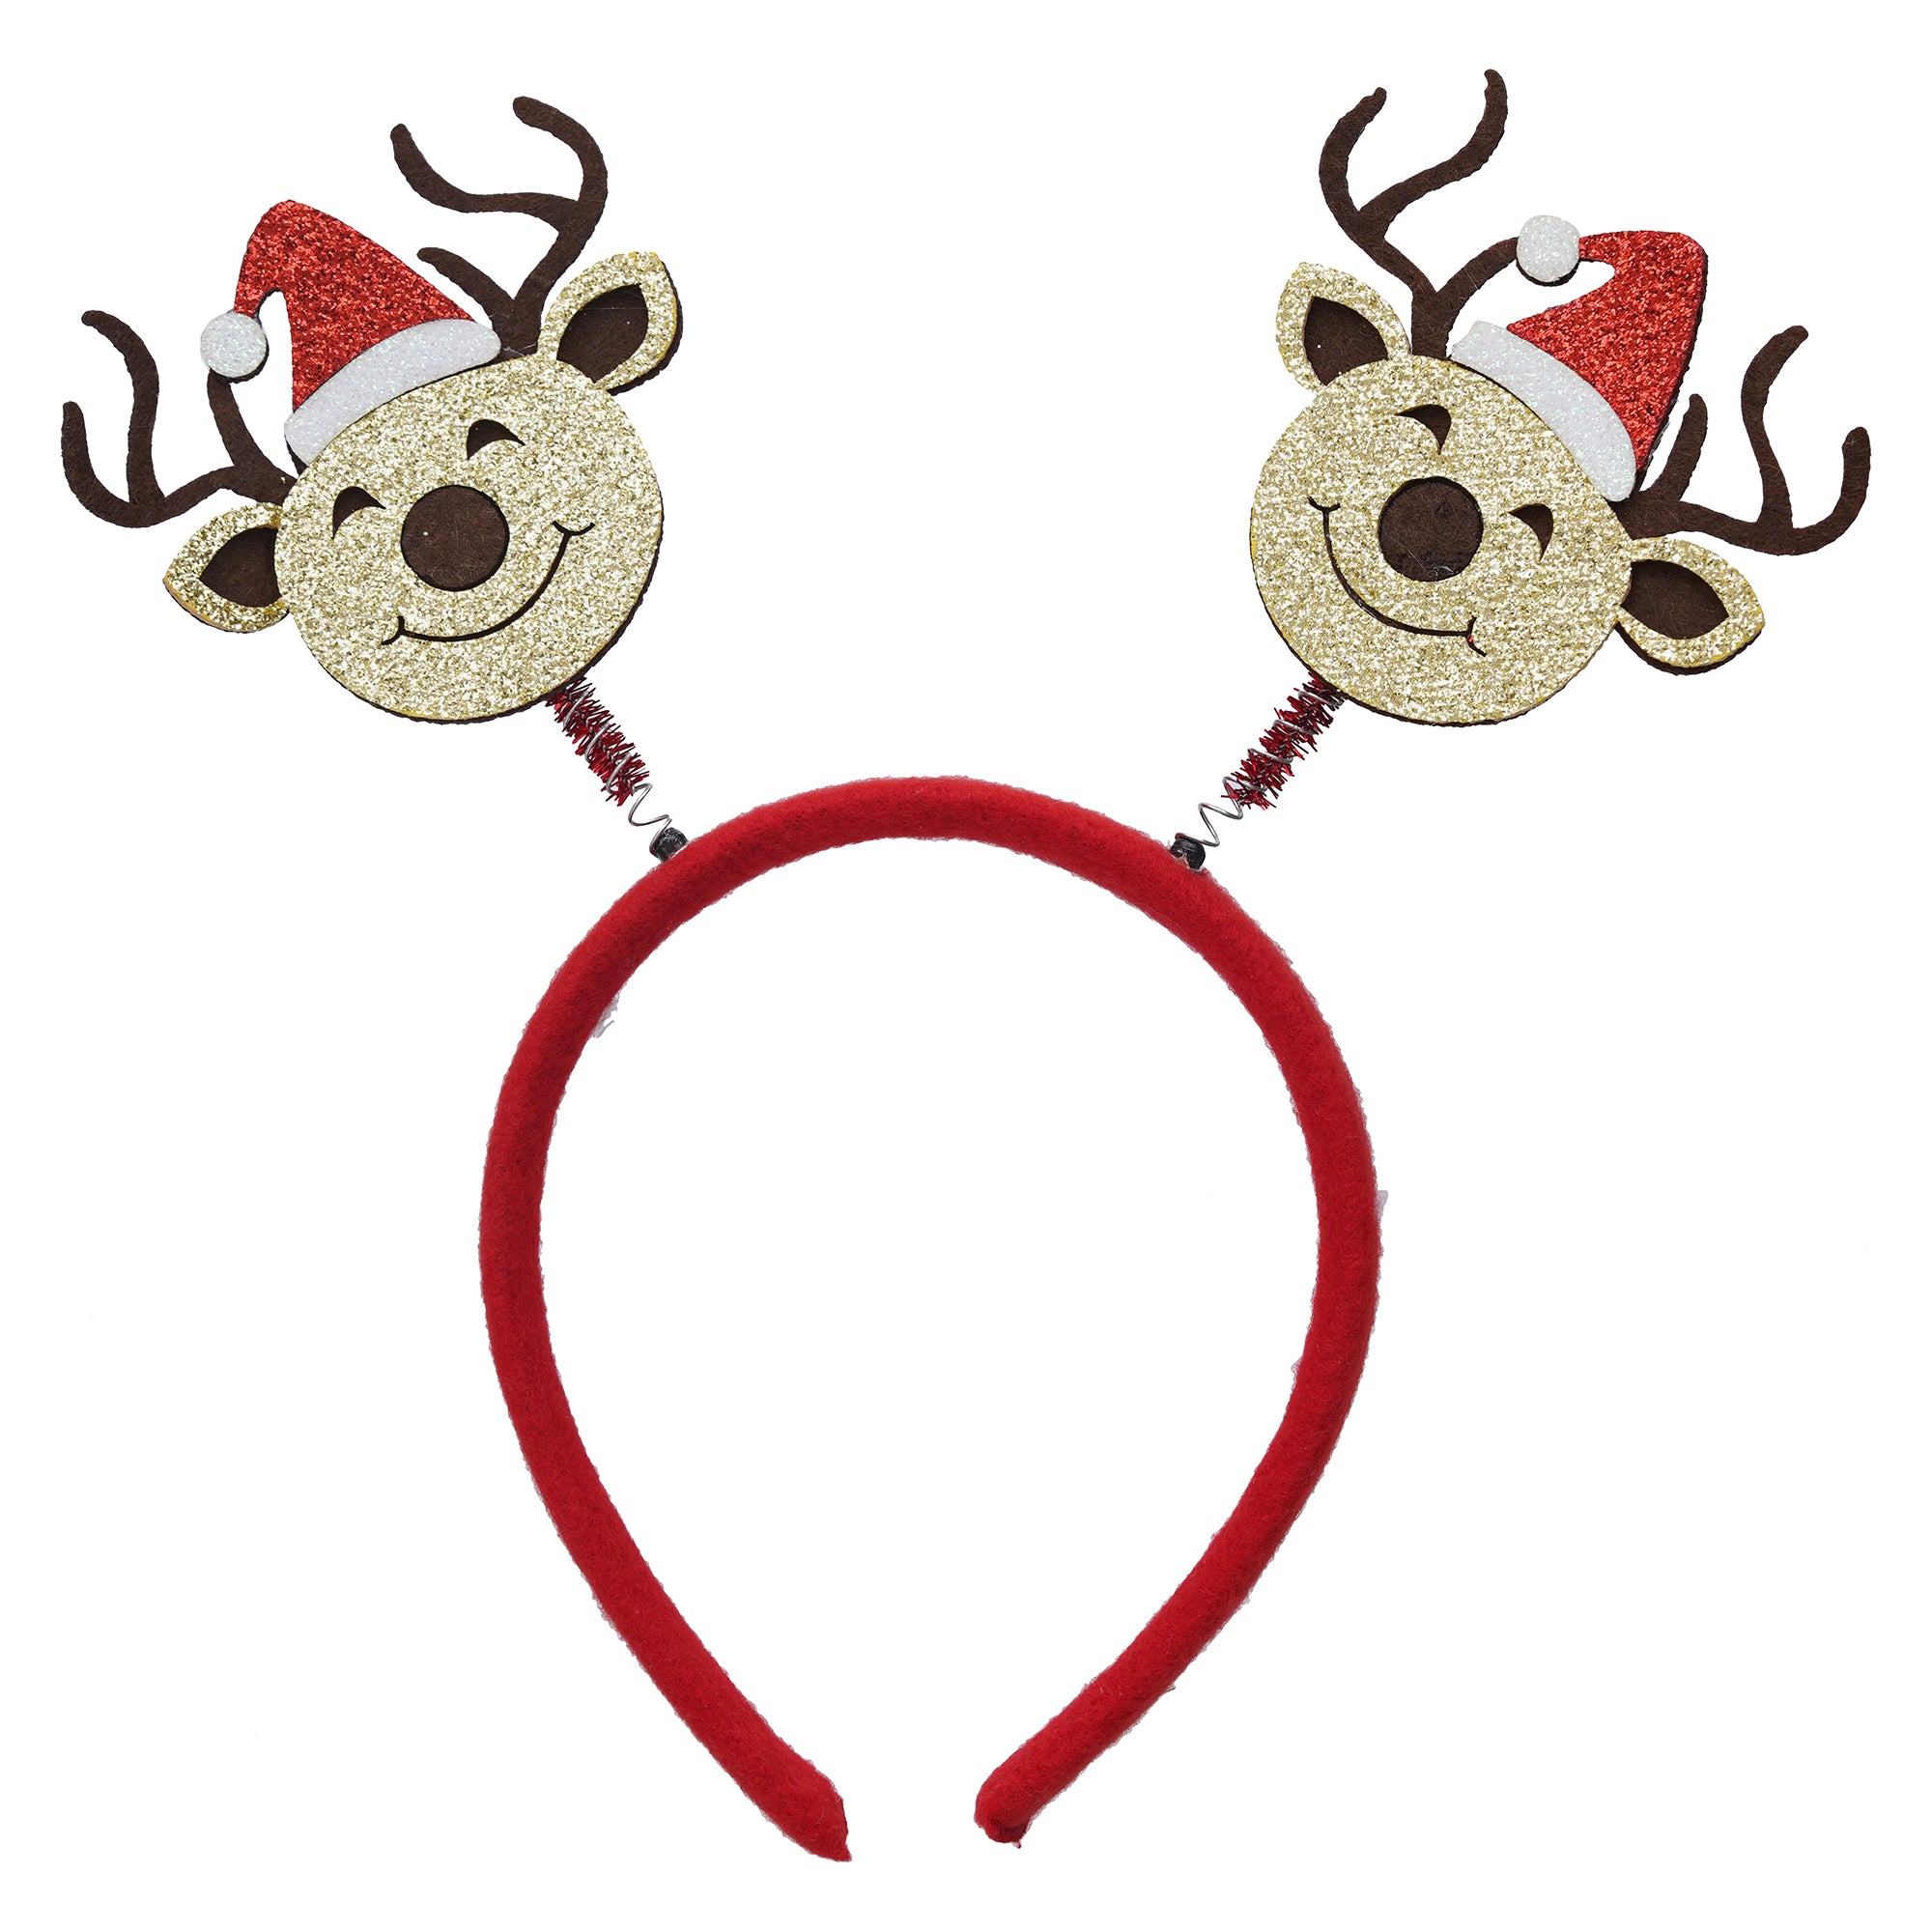 eCraftIndia Christmas Reindeer Design Headband for Christmas and Birthday Parties  Best Gift for Women, Girls, and Kids 2